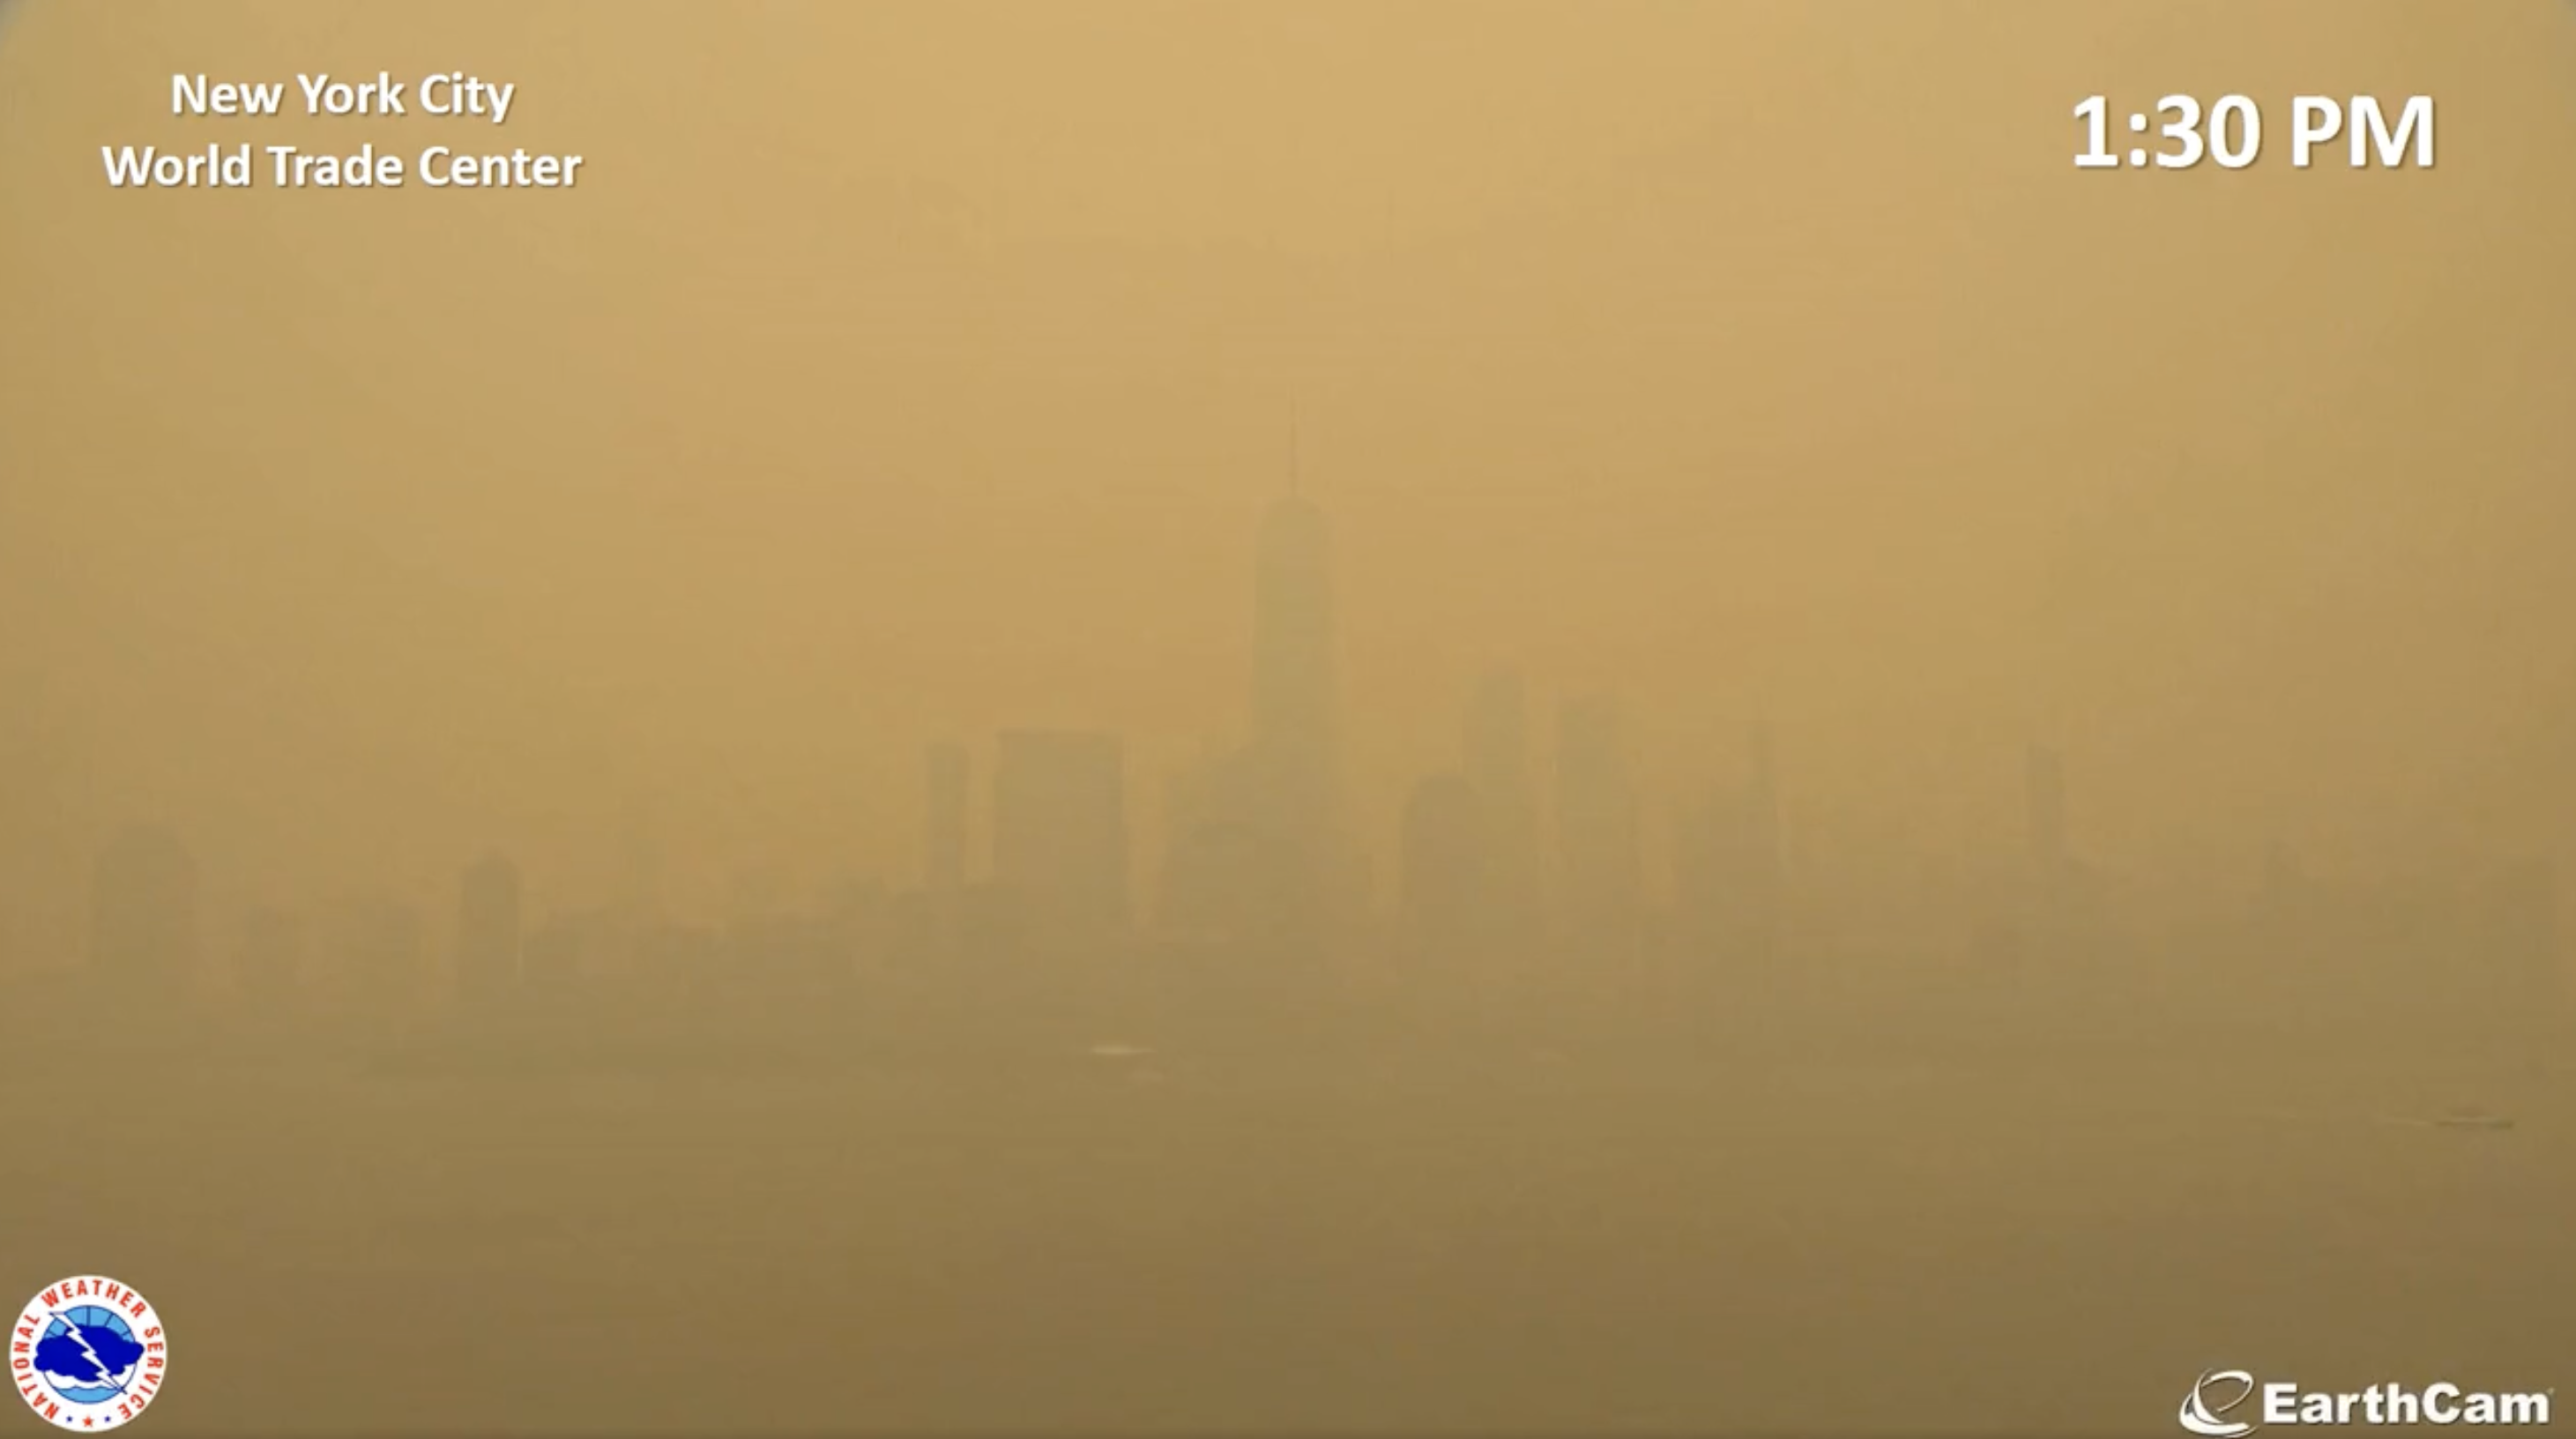 View of the downtown Manhattan skyline at 1:30 pm, with the skyline barely visible